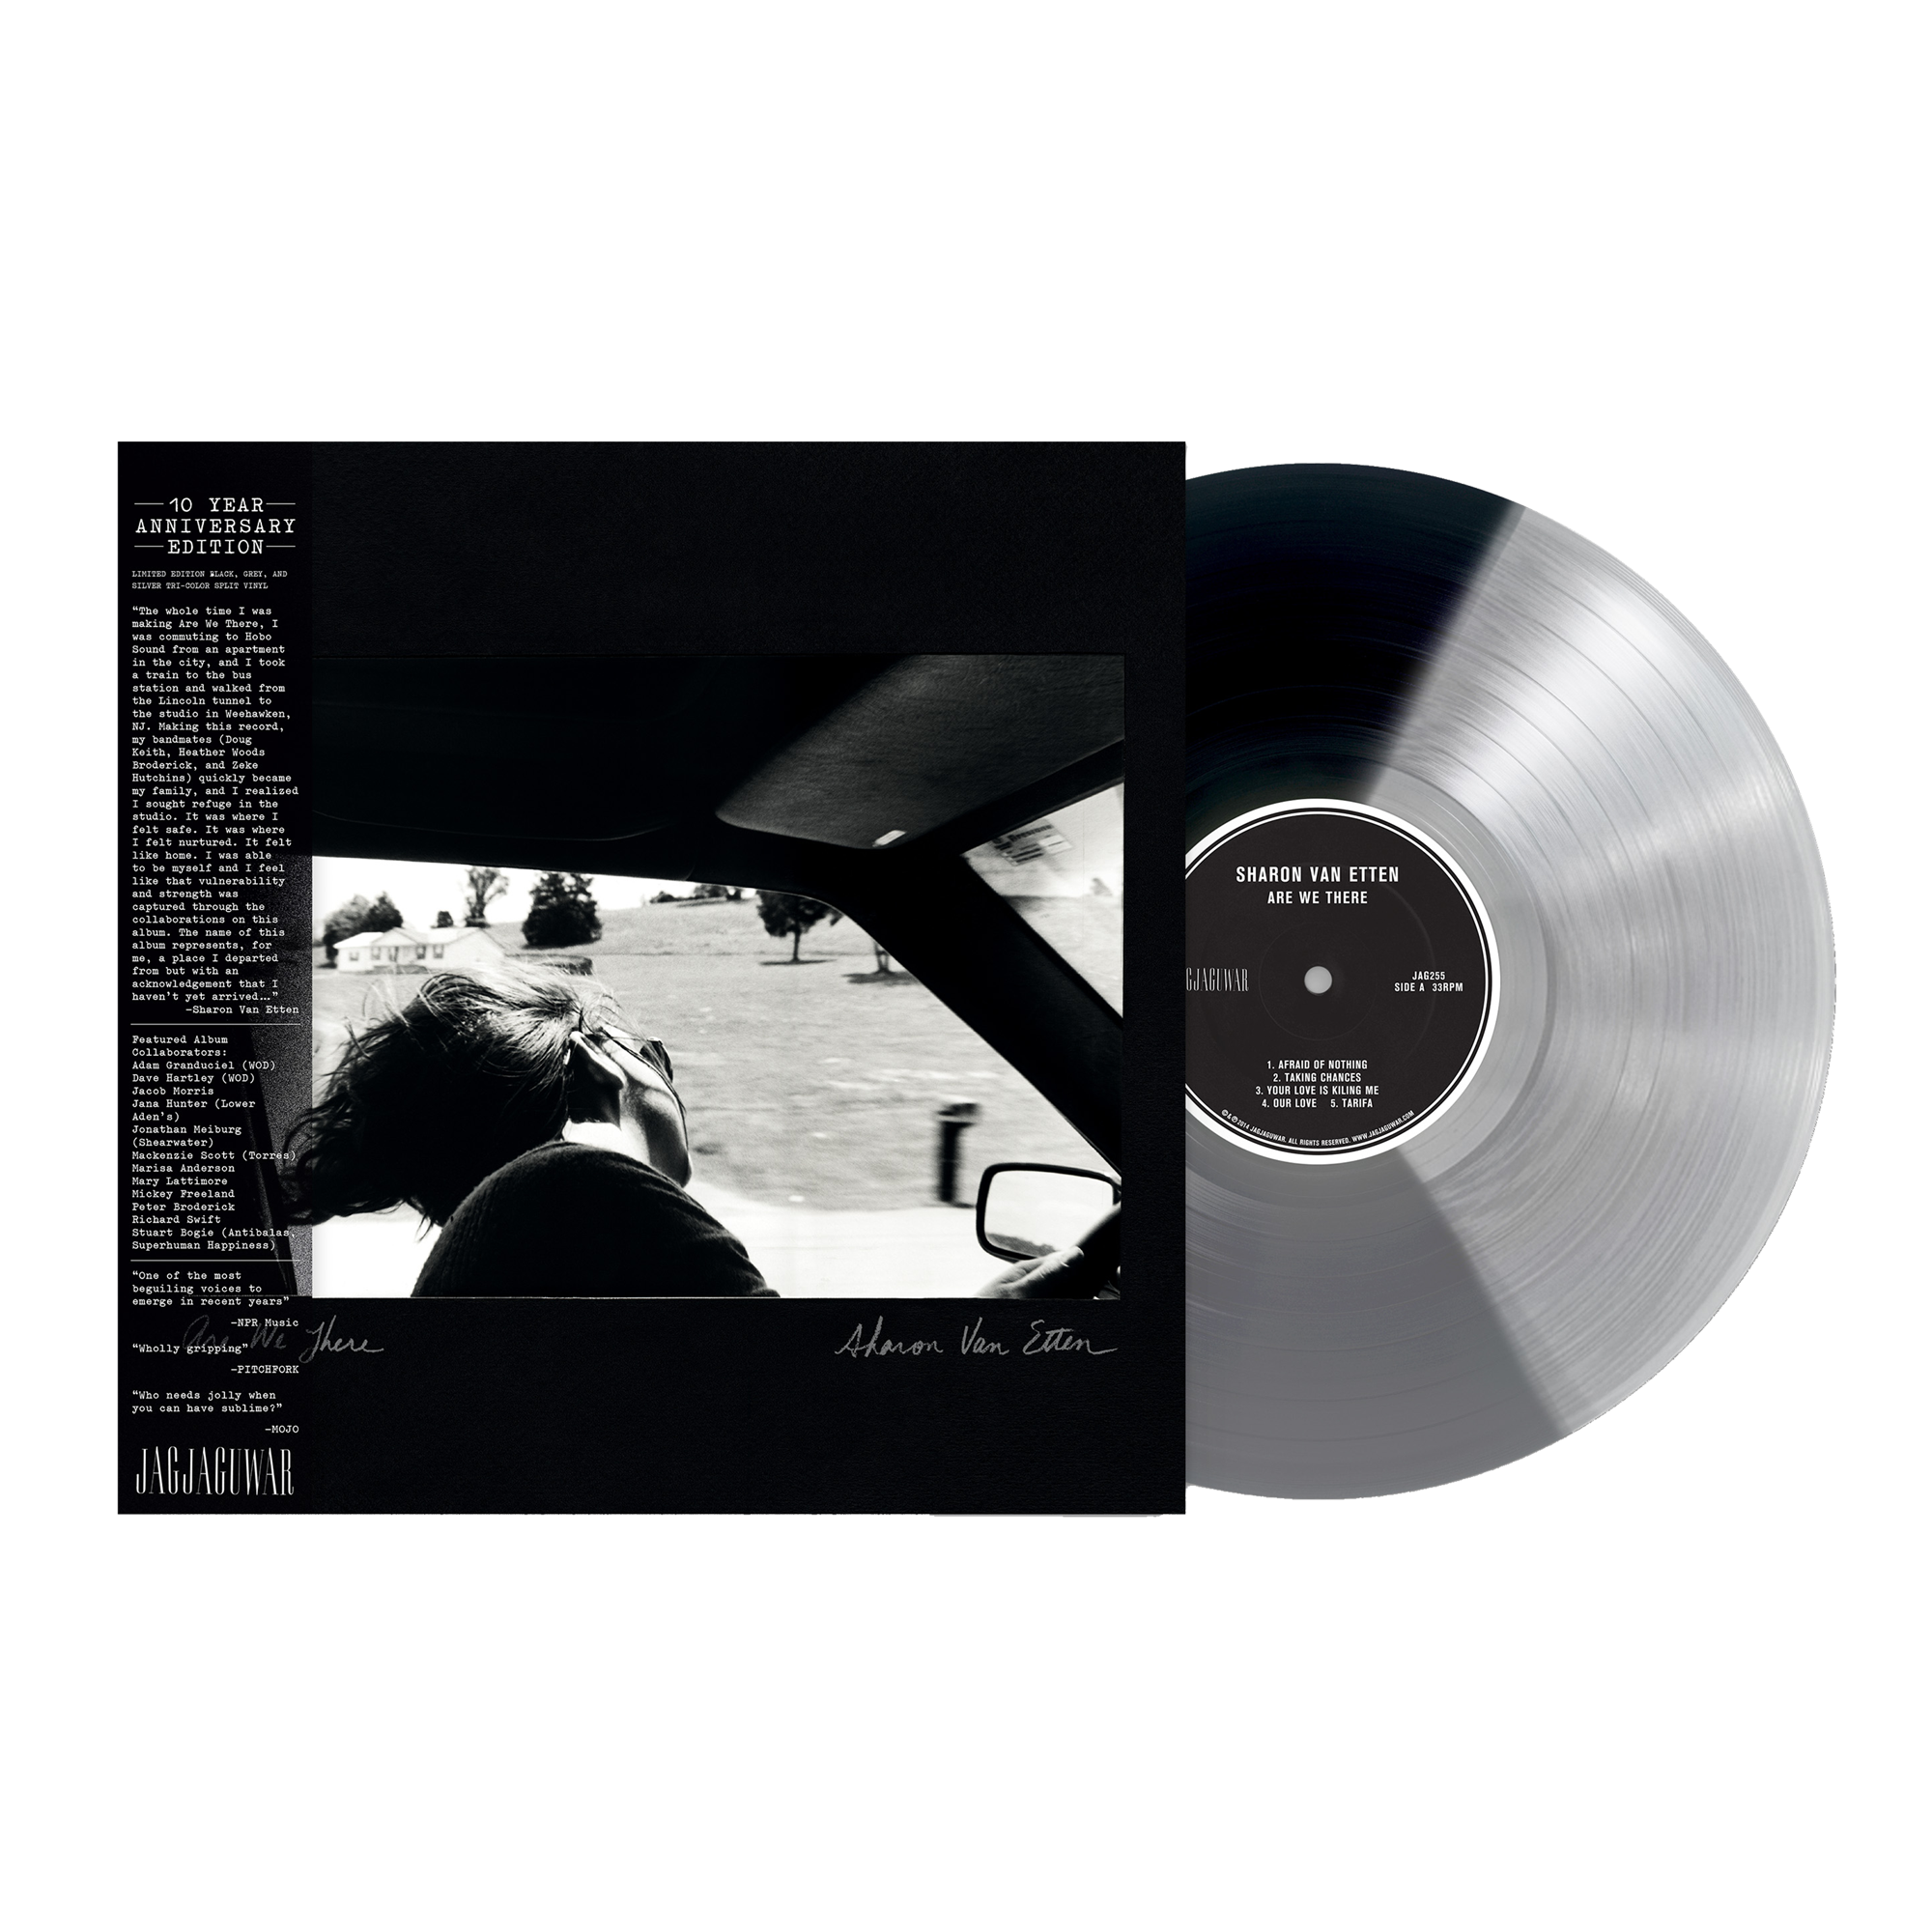 Are We There (10th Anniversary): Limited Black, Grey and Silver Tri-Color Split Vinyl LP